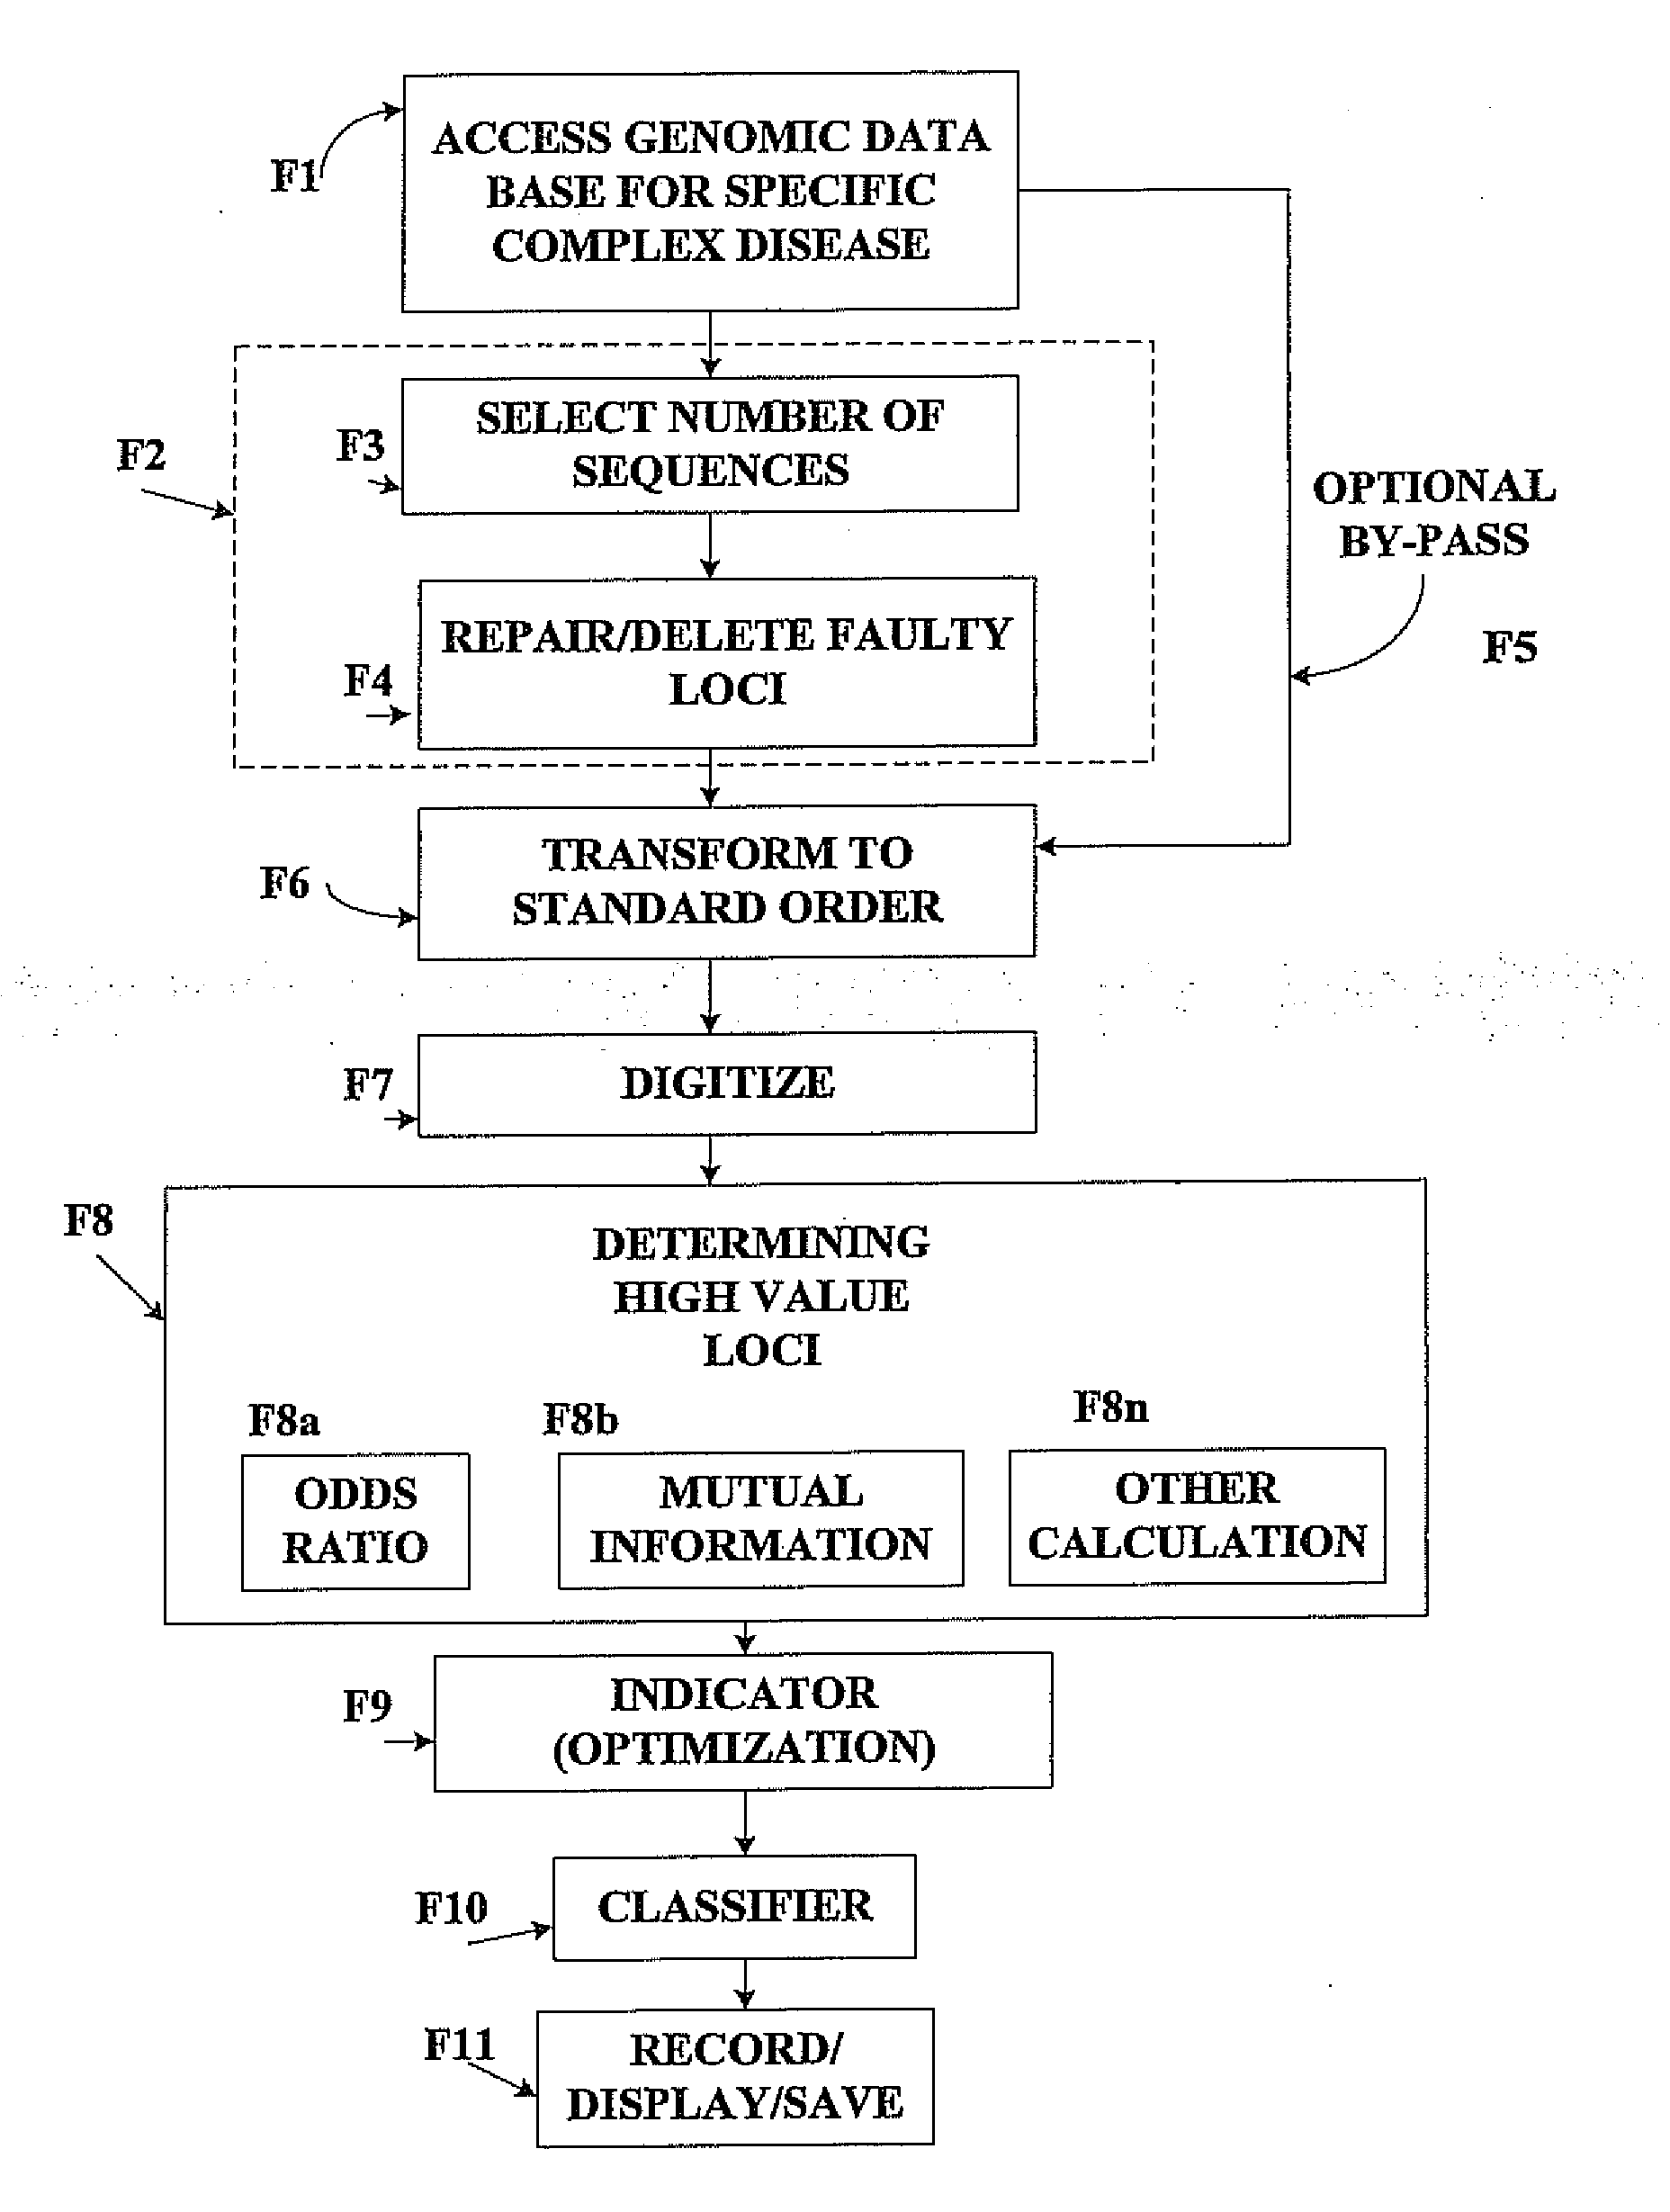 Method for identifying and employing high risk genomic markers for the prediction of specific diseases